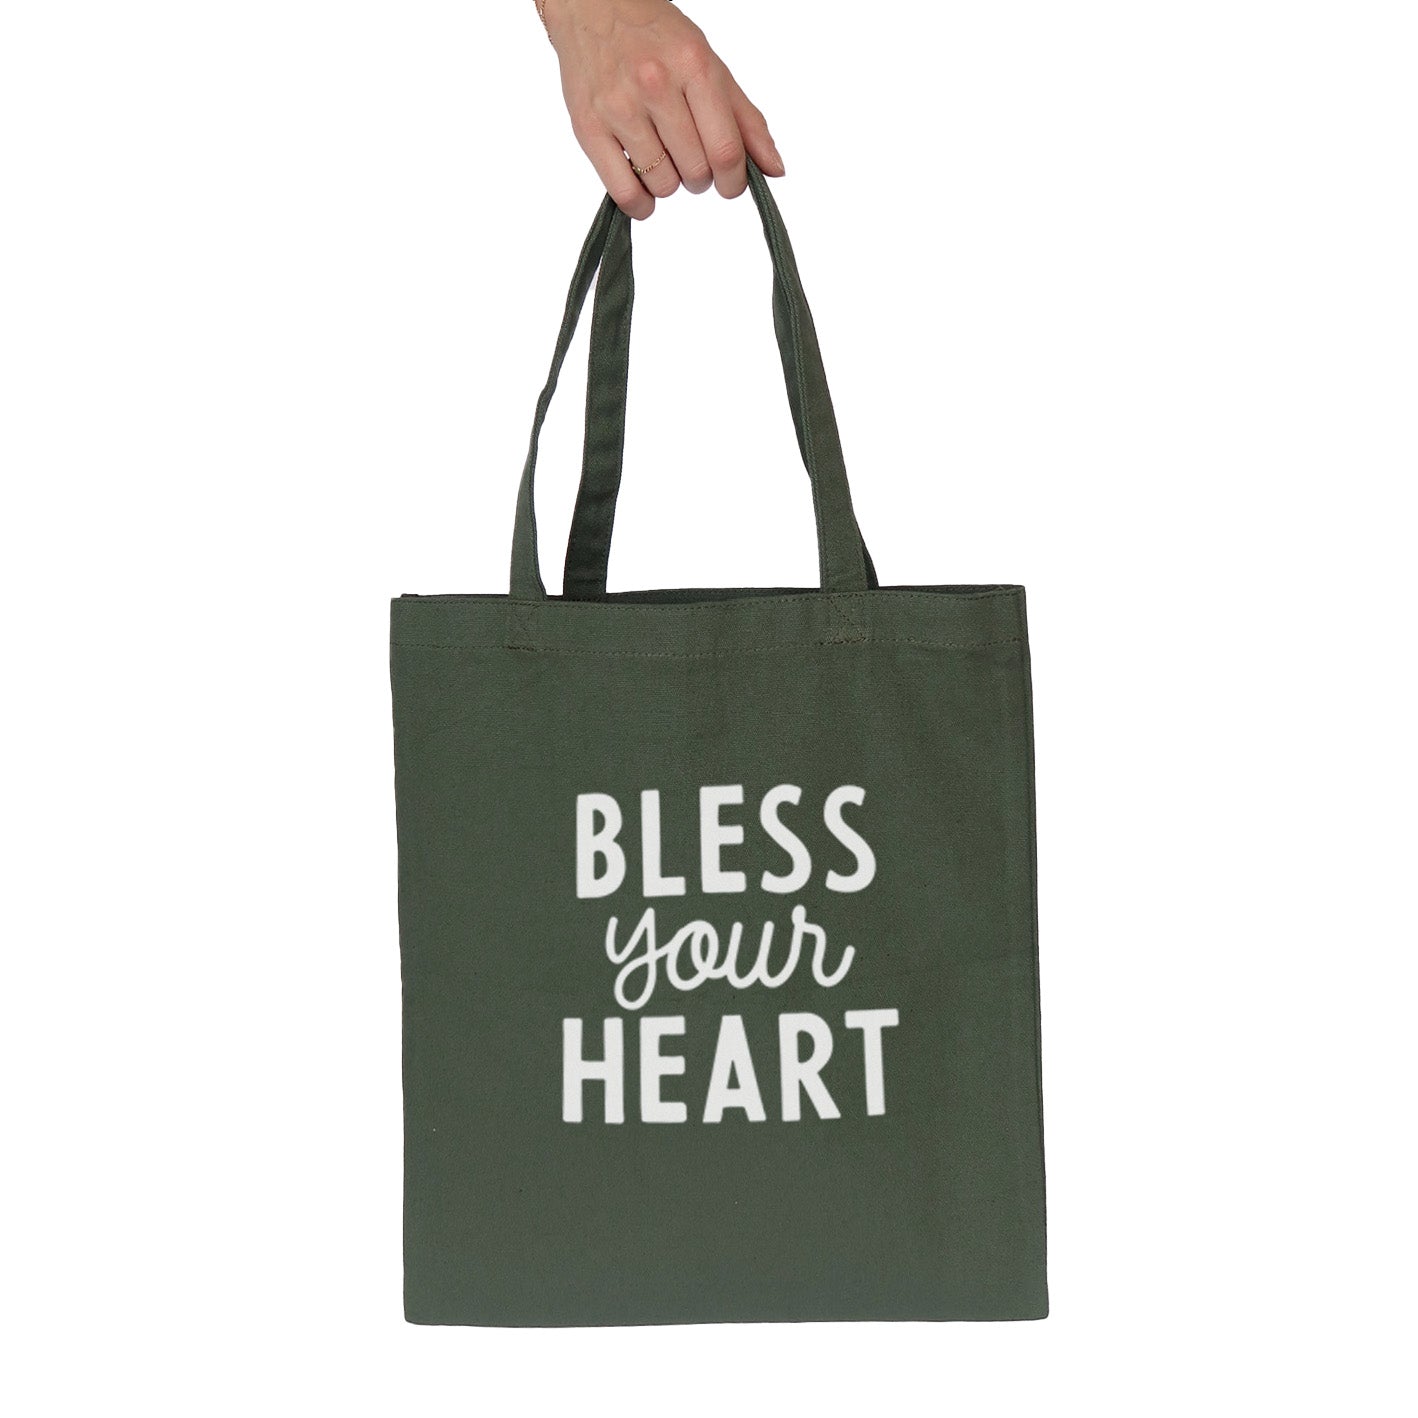 Bless Your Heart Tote Bag